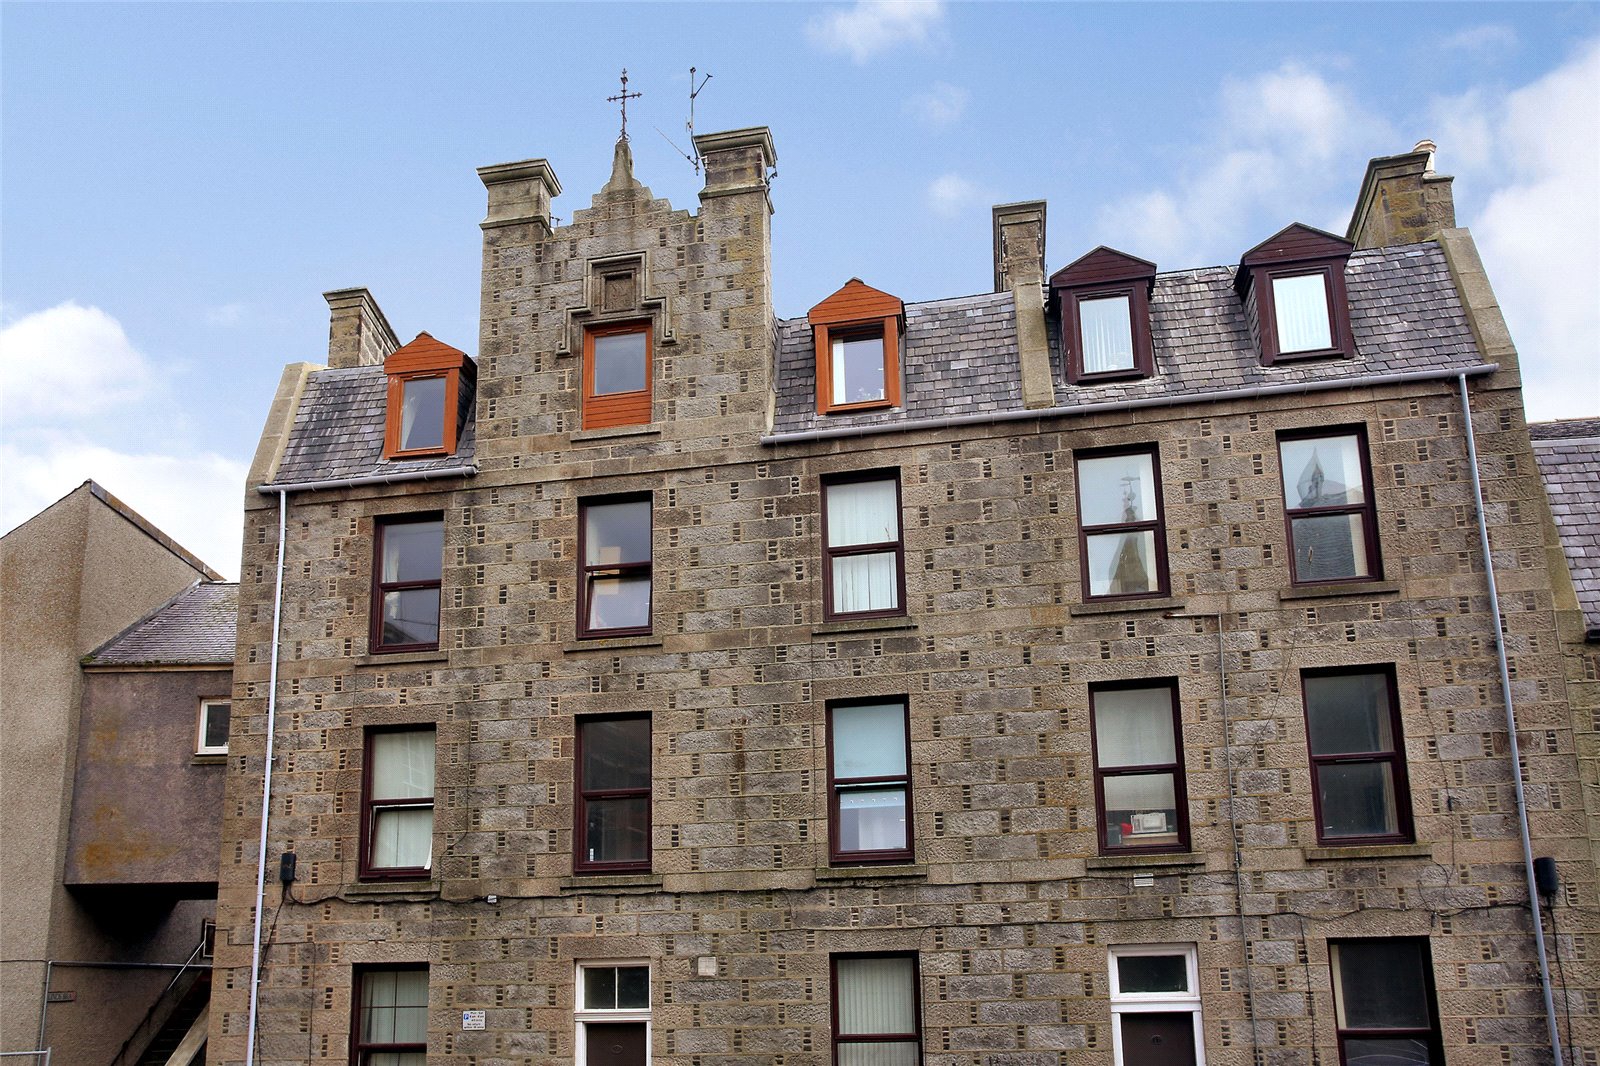 This top floor flat could be yours for £35,000...